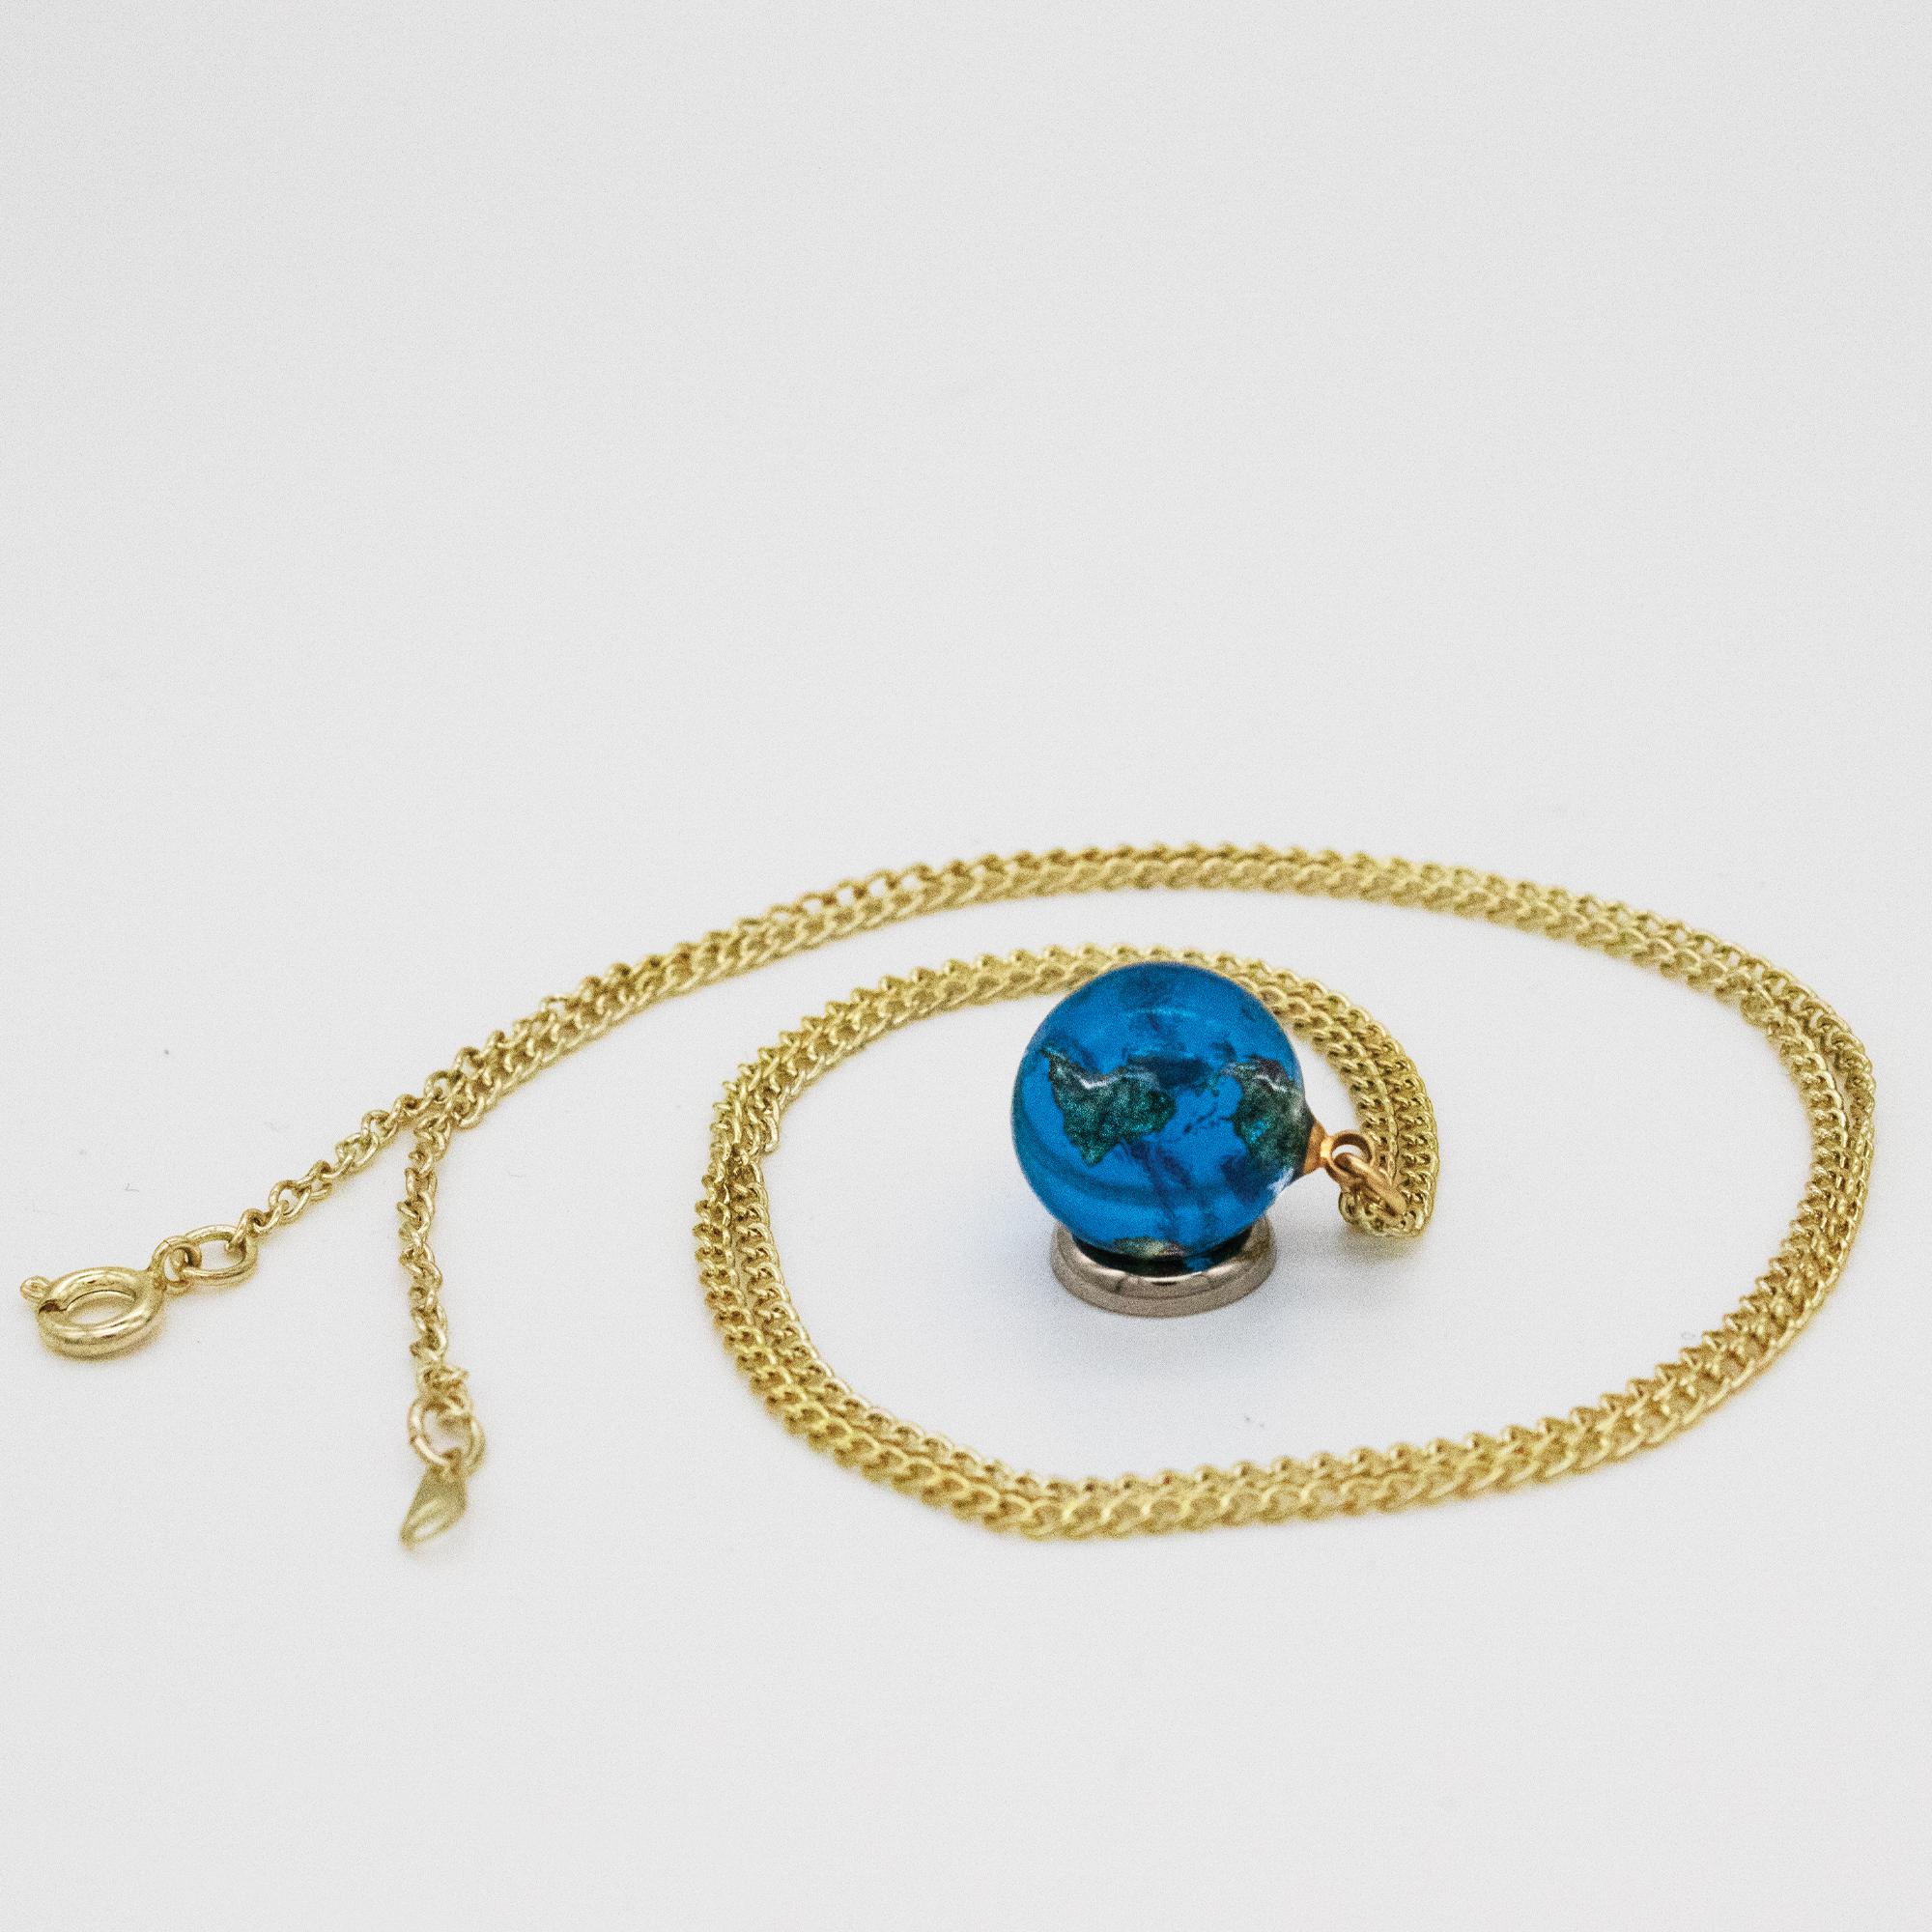 1/2” Natural Earth Necklace on Gold Fill Chain